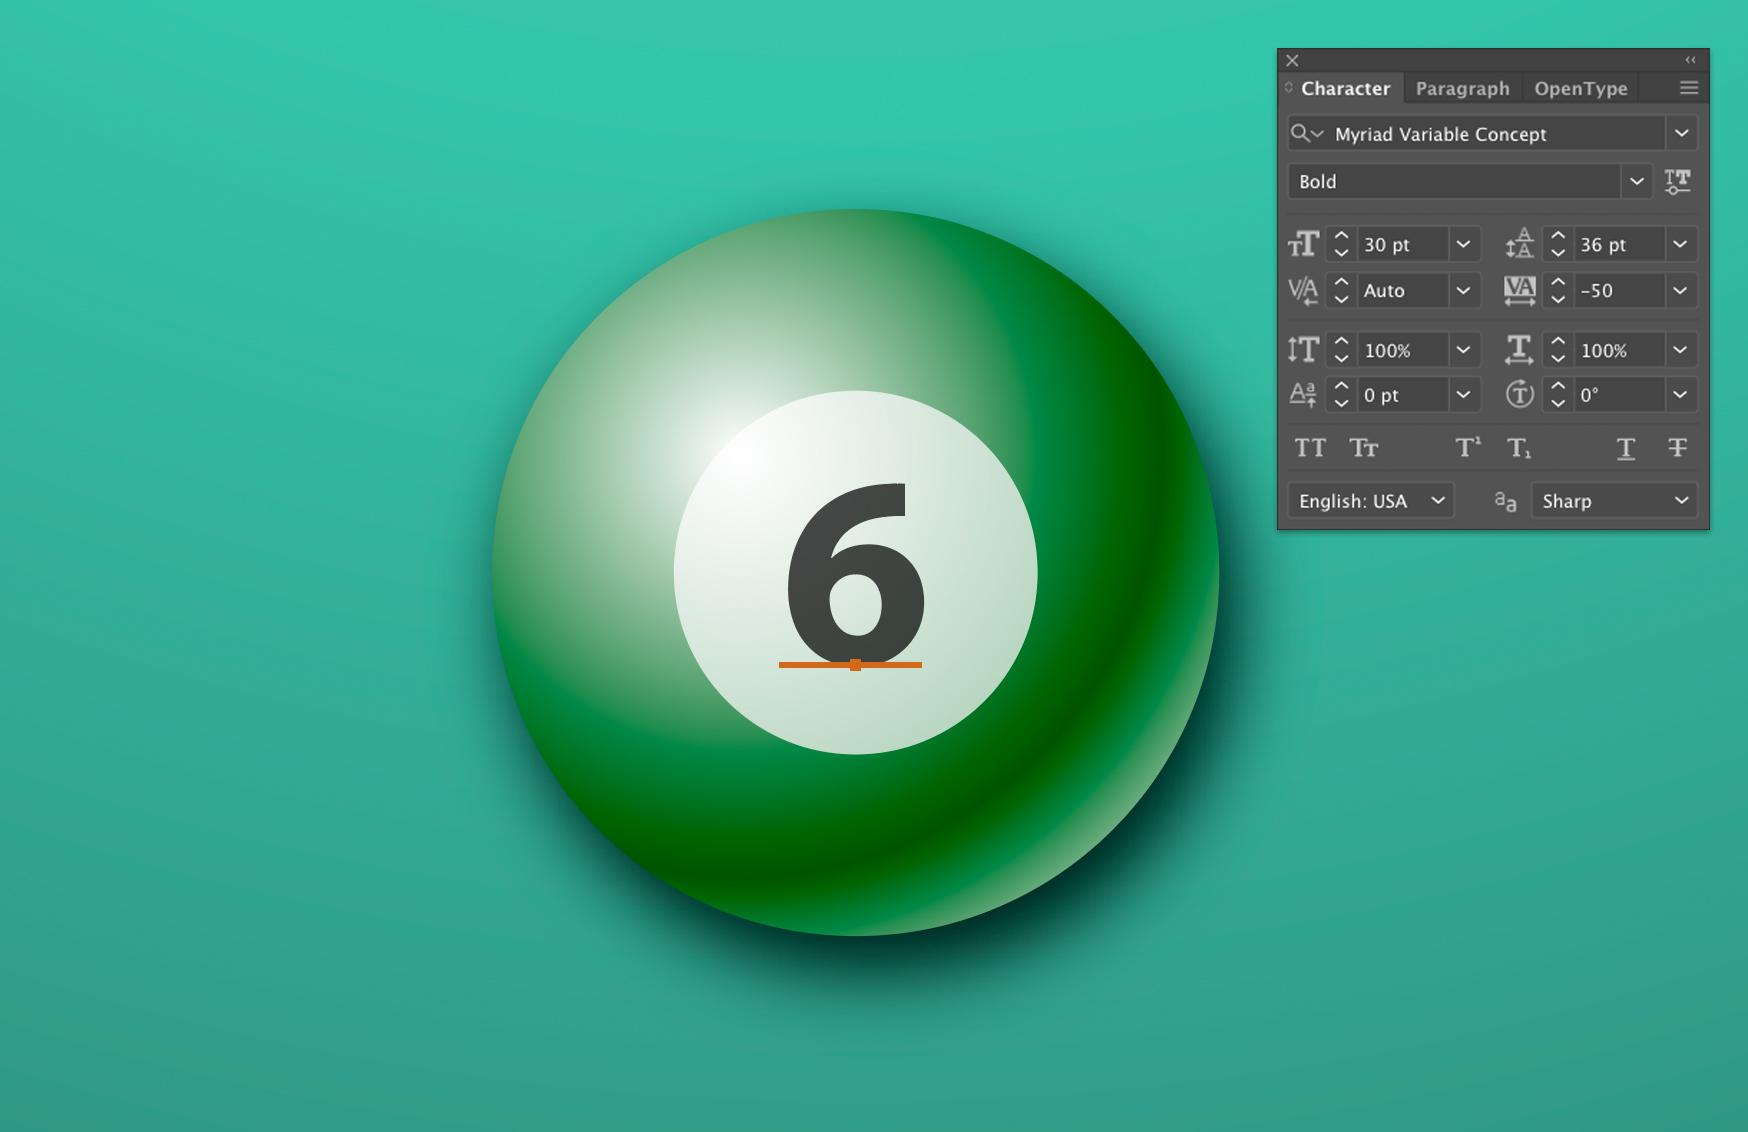 Ball with the number 6 applied and the Character panel settings shown